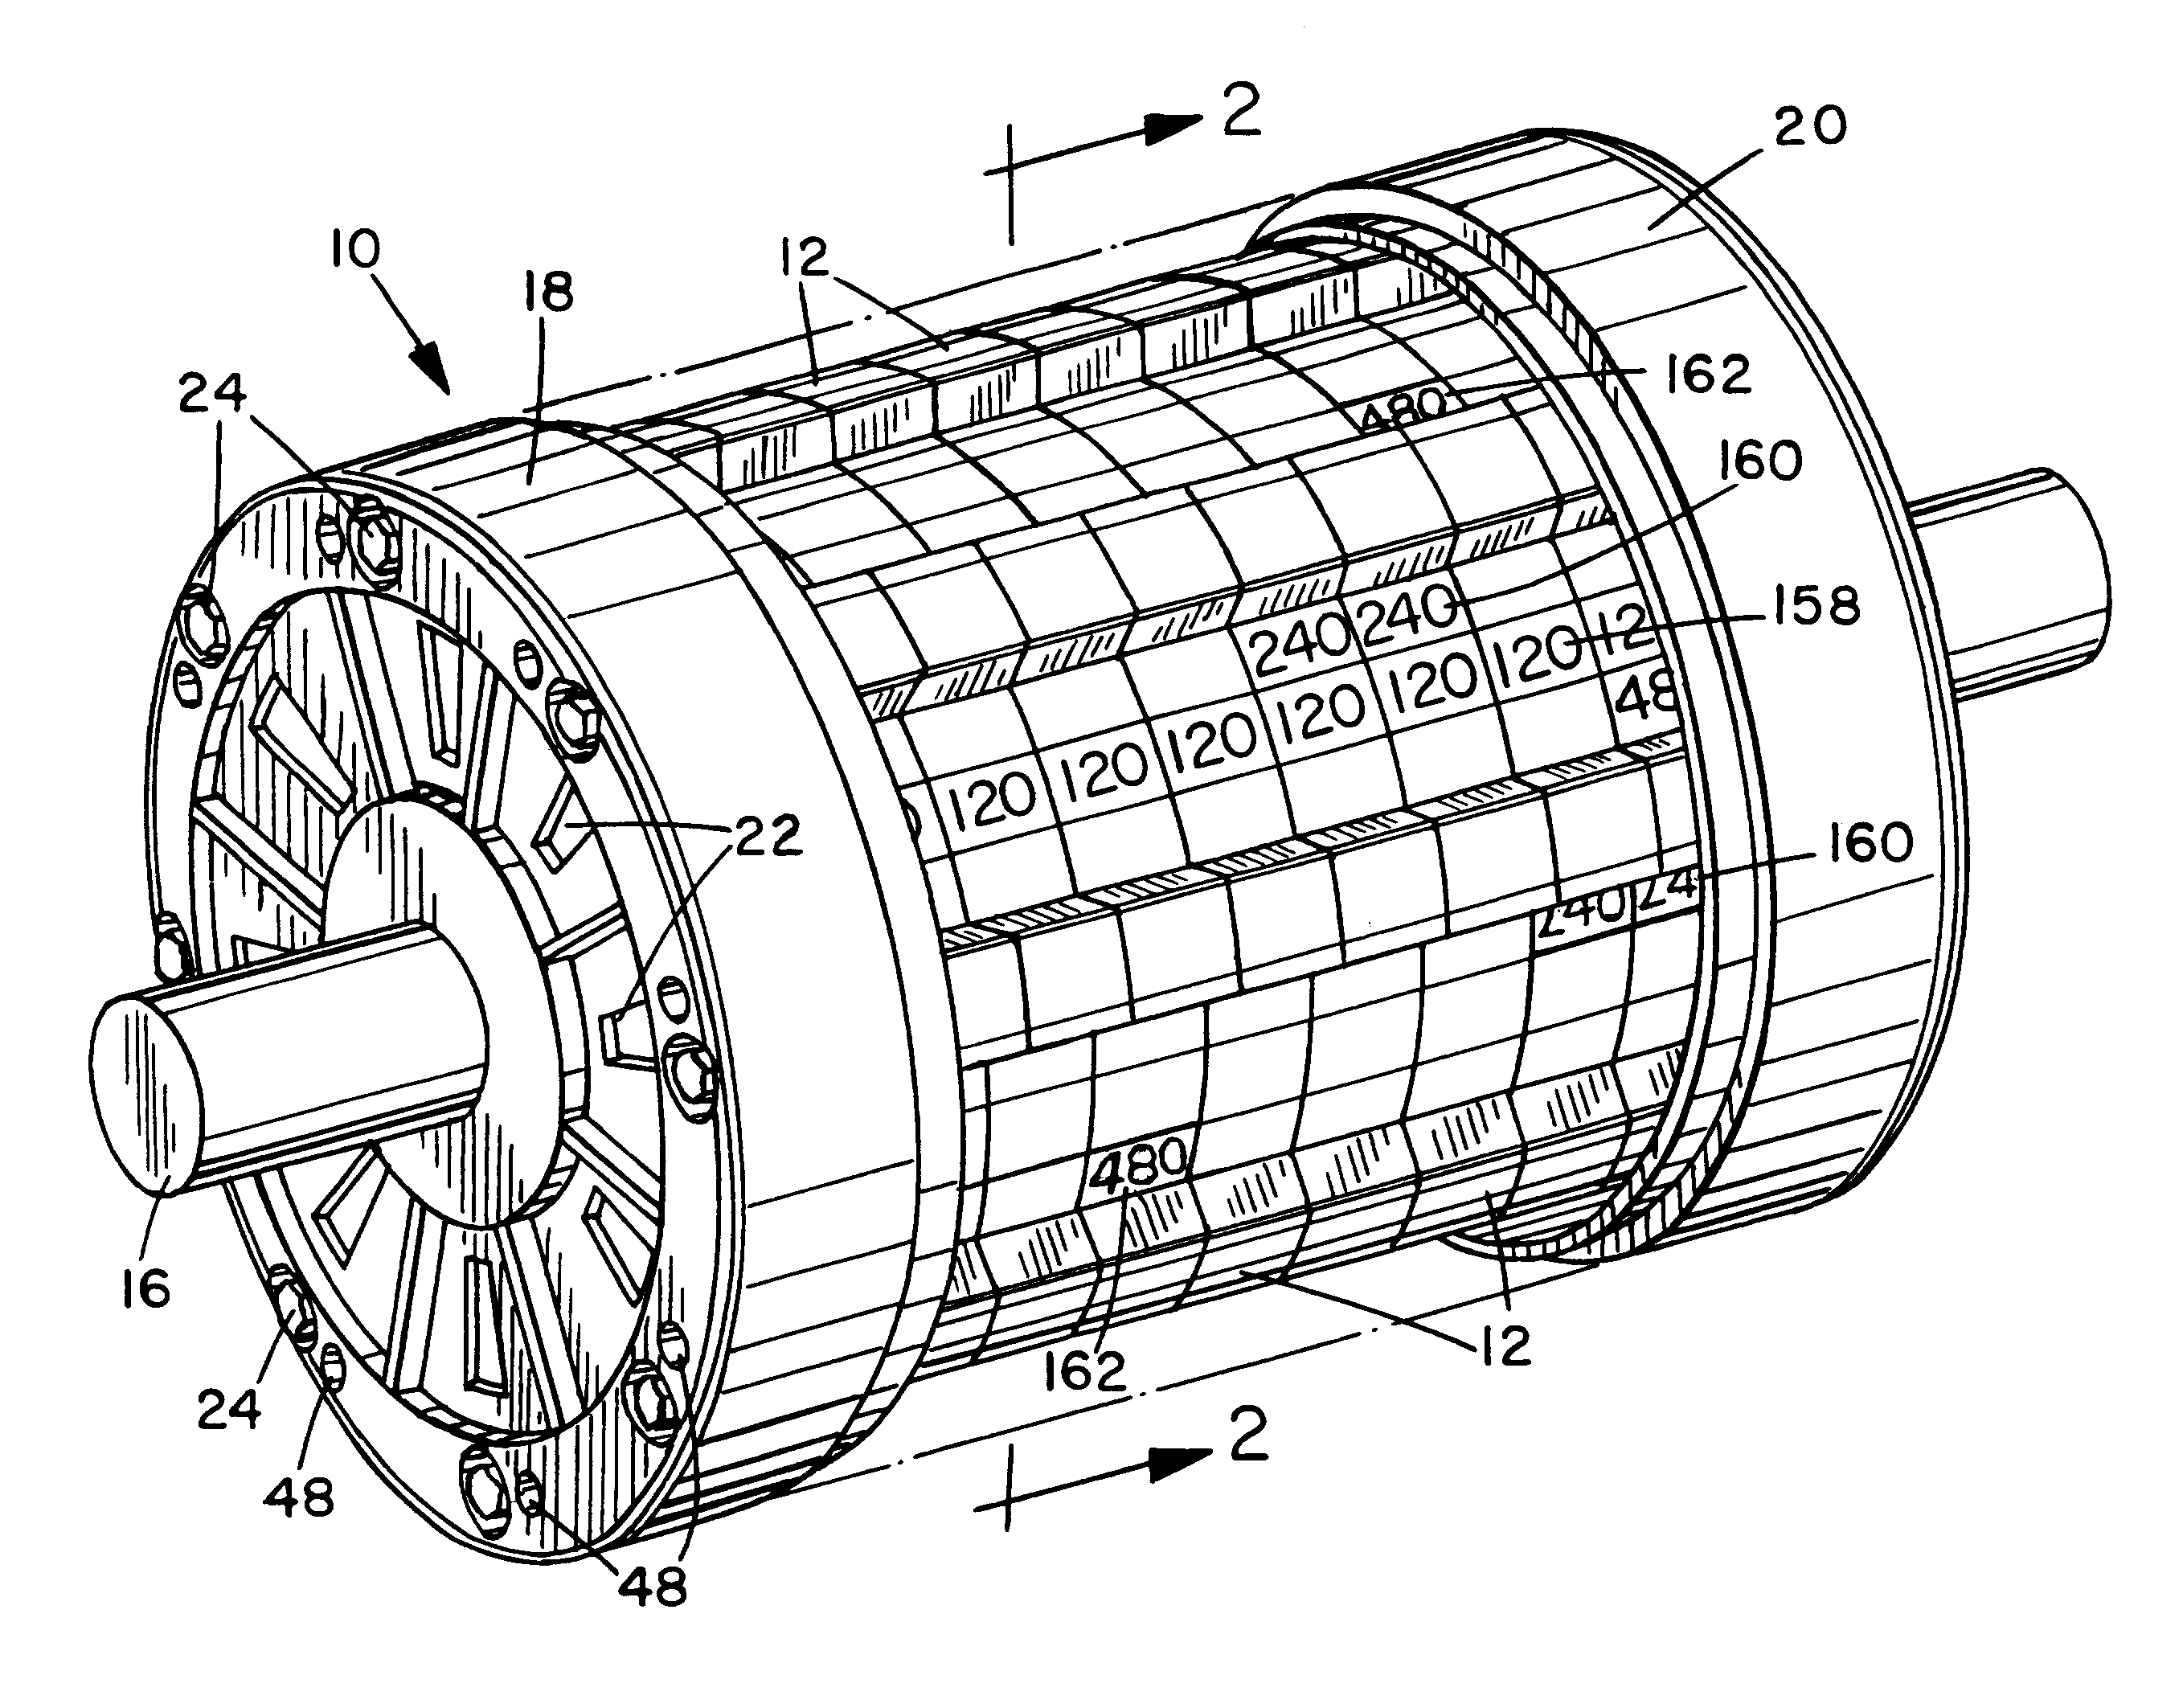 Method for selectively coupling layers of a stator in a motor/generator